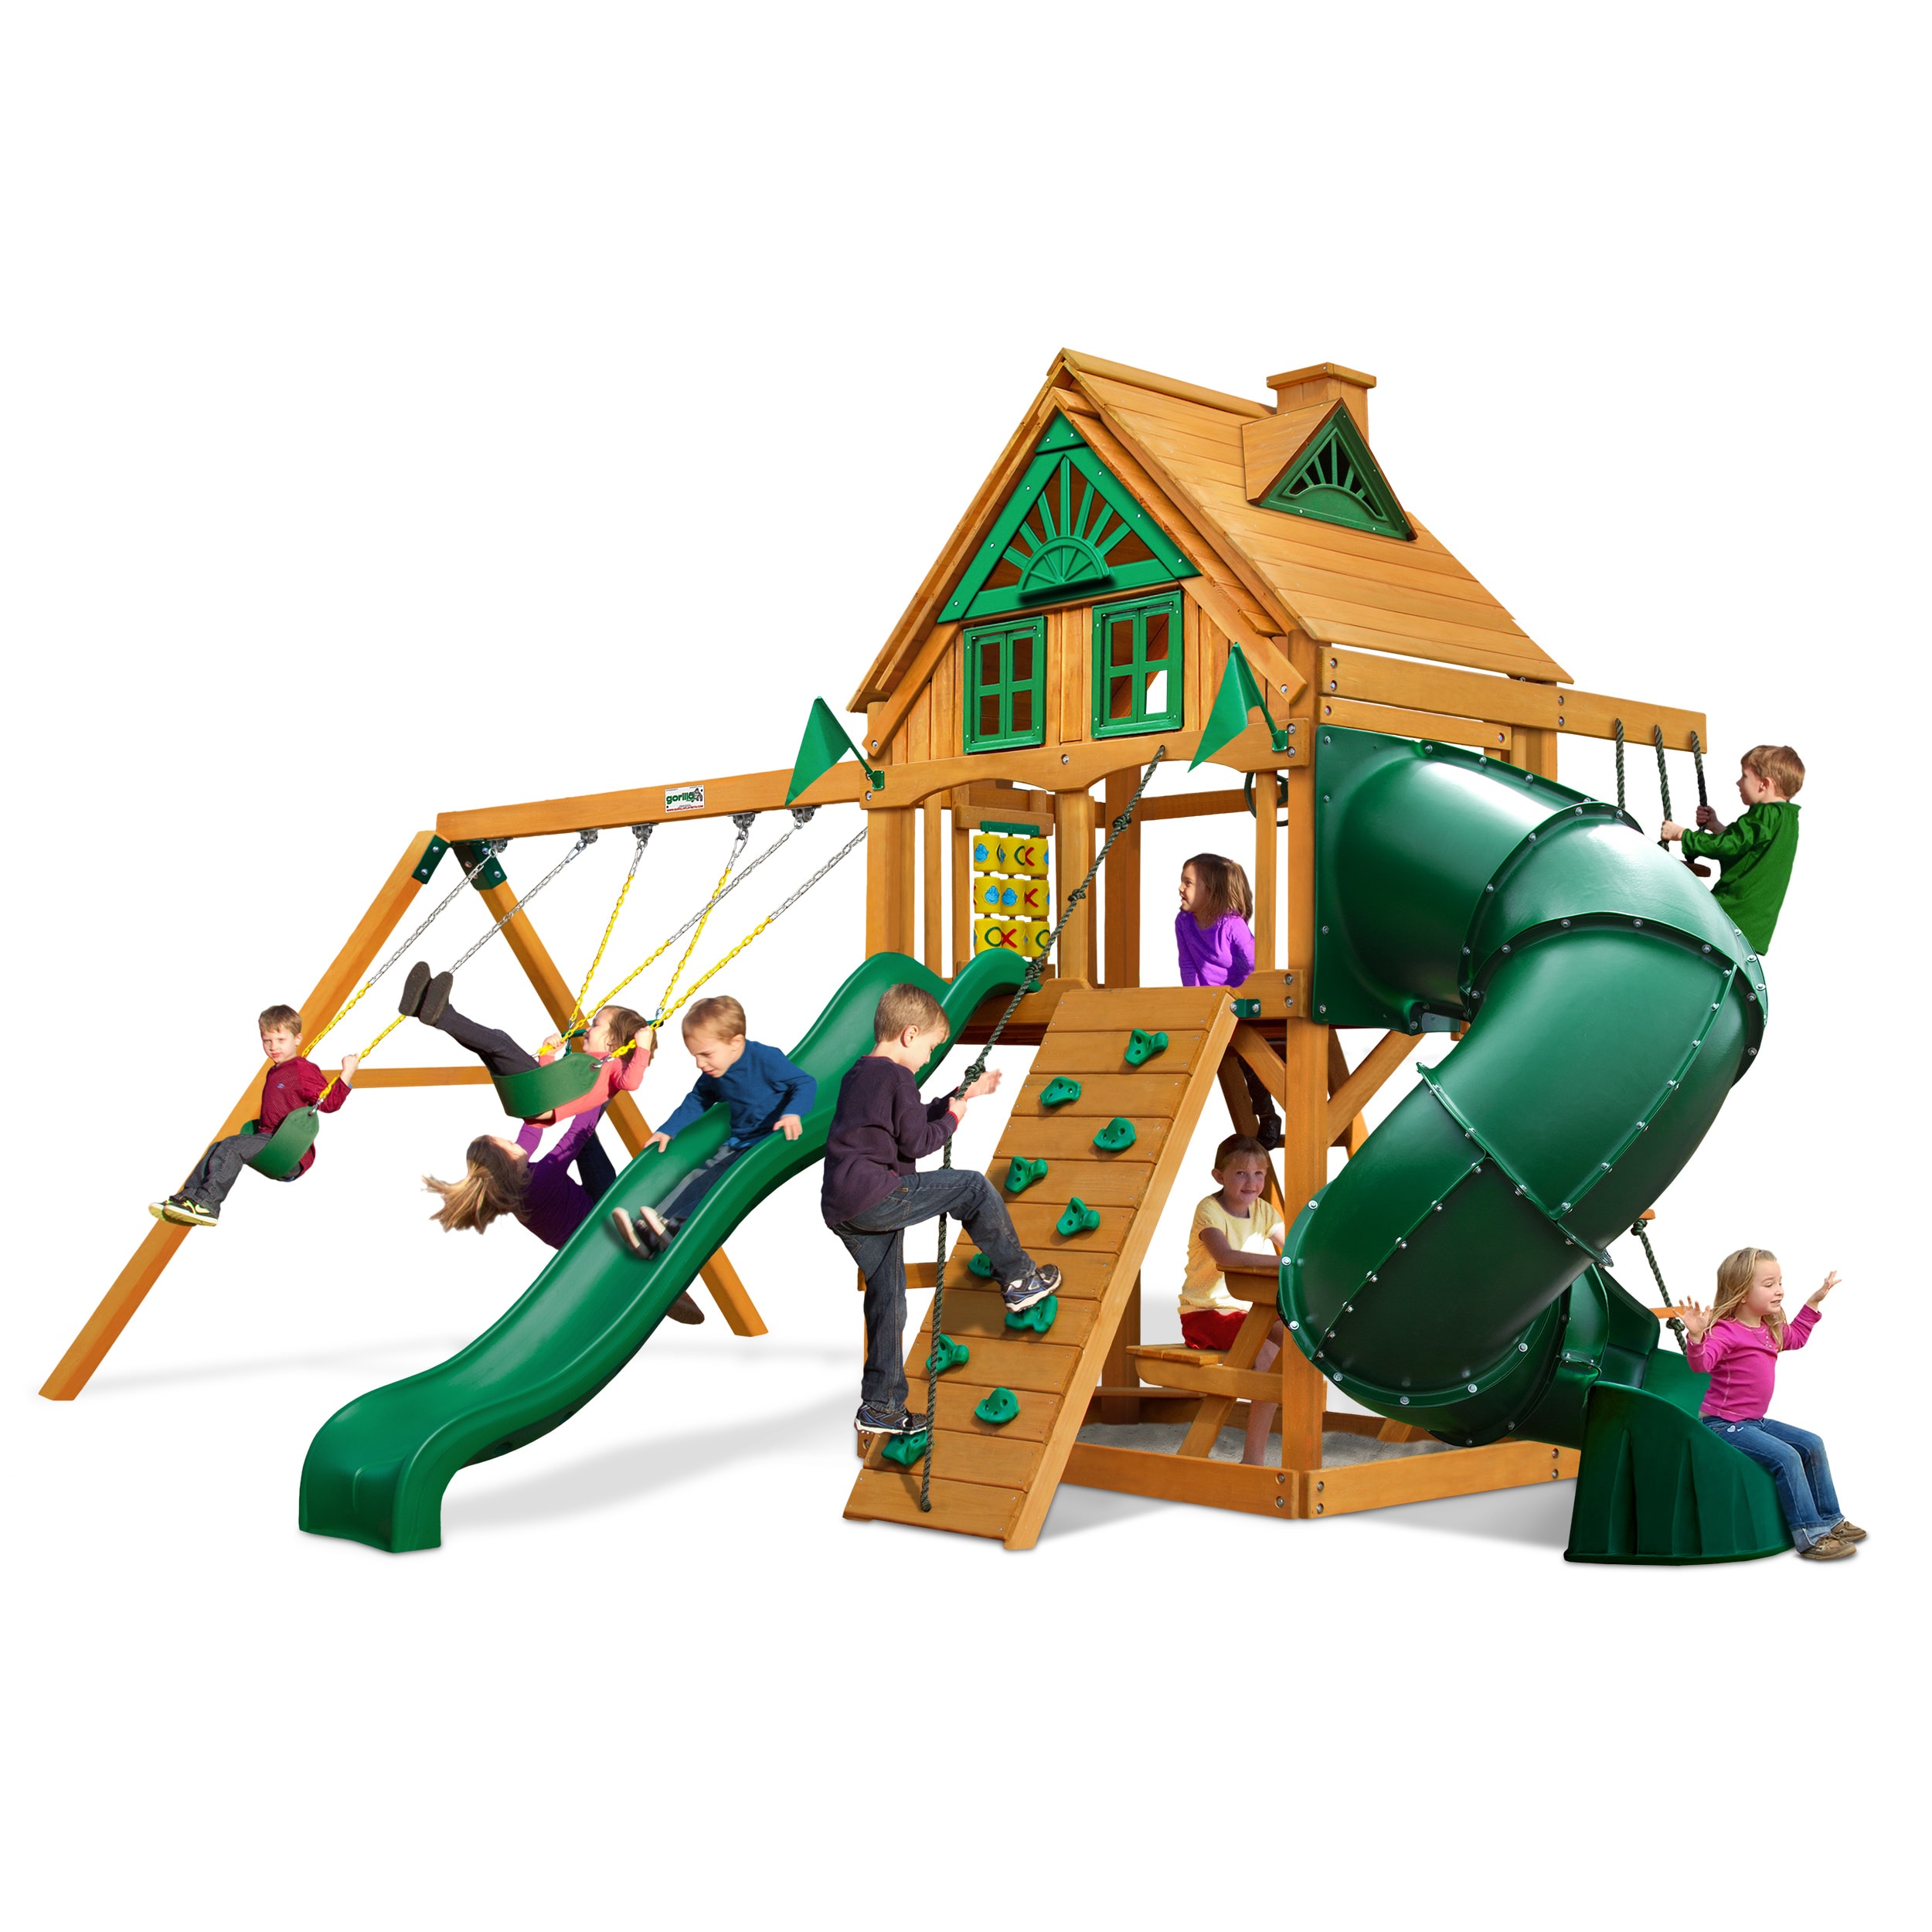 Gorilla Playsets Mountaineer Treehouse Swing Set with Amber Posts